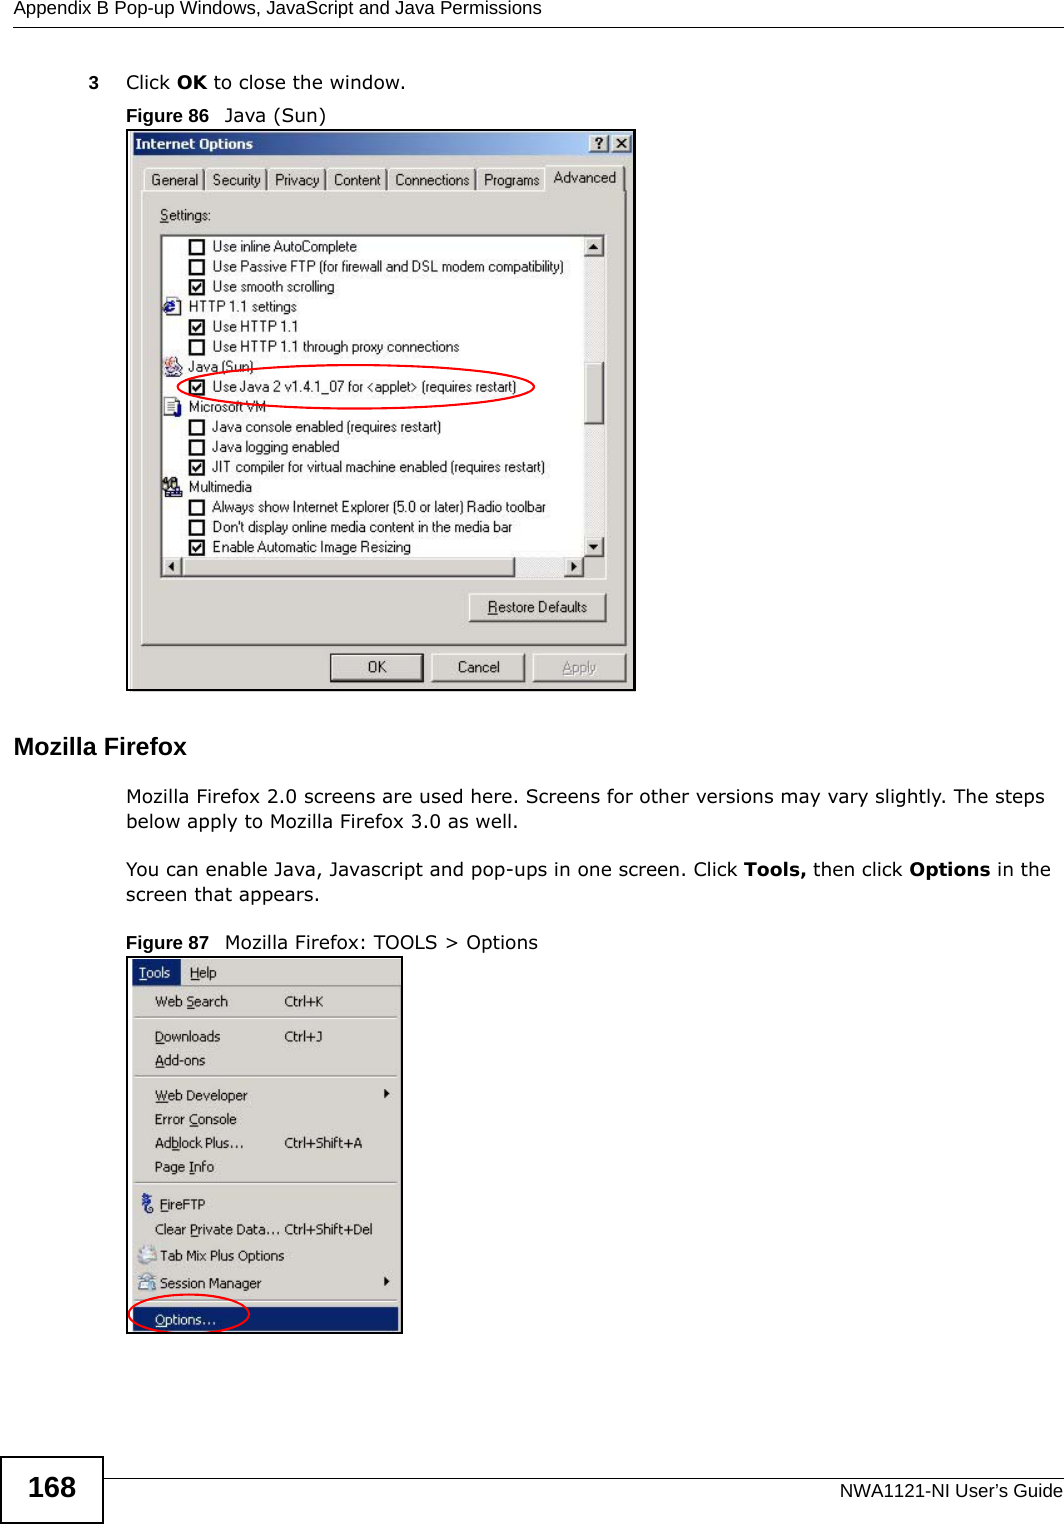 Appendix B Pop-up Windows, JavaScript and Java PermissionsNWA1121-NI User’s Guide1683Click OK to close the window.Figure 86   Java (Sun)Mozilla FirefoxMozilla Firefox 2.0 screens are used here. Screens for other versions may vary slightly. The steps below apply to Mozilla Firefox 3.0 as well.You can enable Java, Javascript and pop-ups in one screen. Click Tools, then click Options in the screen that appears.Figure 87   Mozilla Firefox: TOOLS &gt; Options